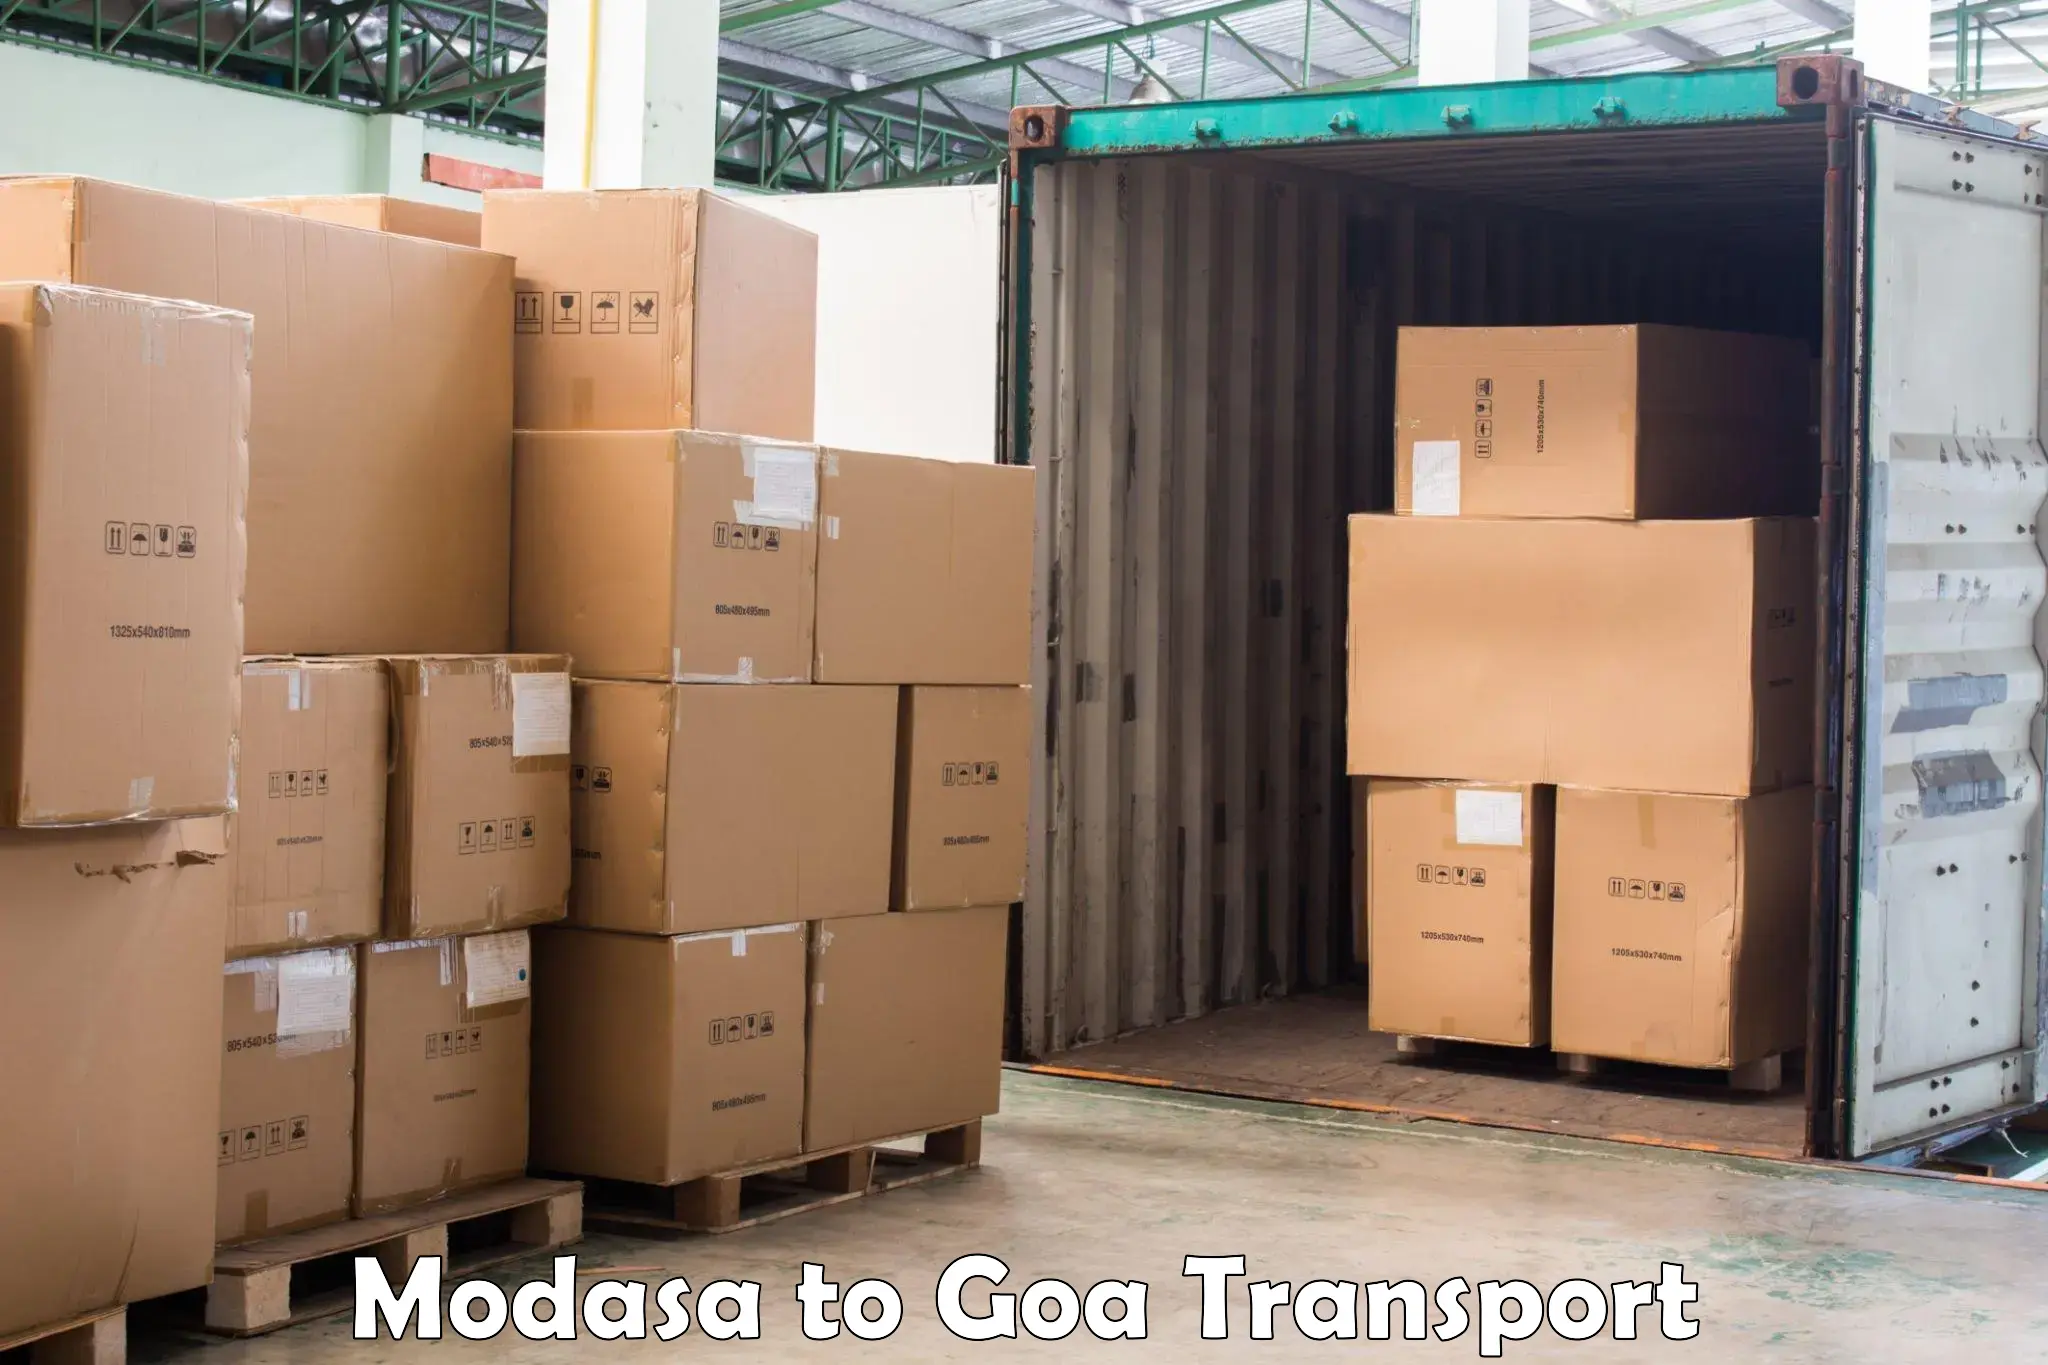 Transport bike from one state to another Modasa to Goa